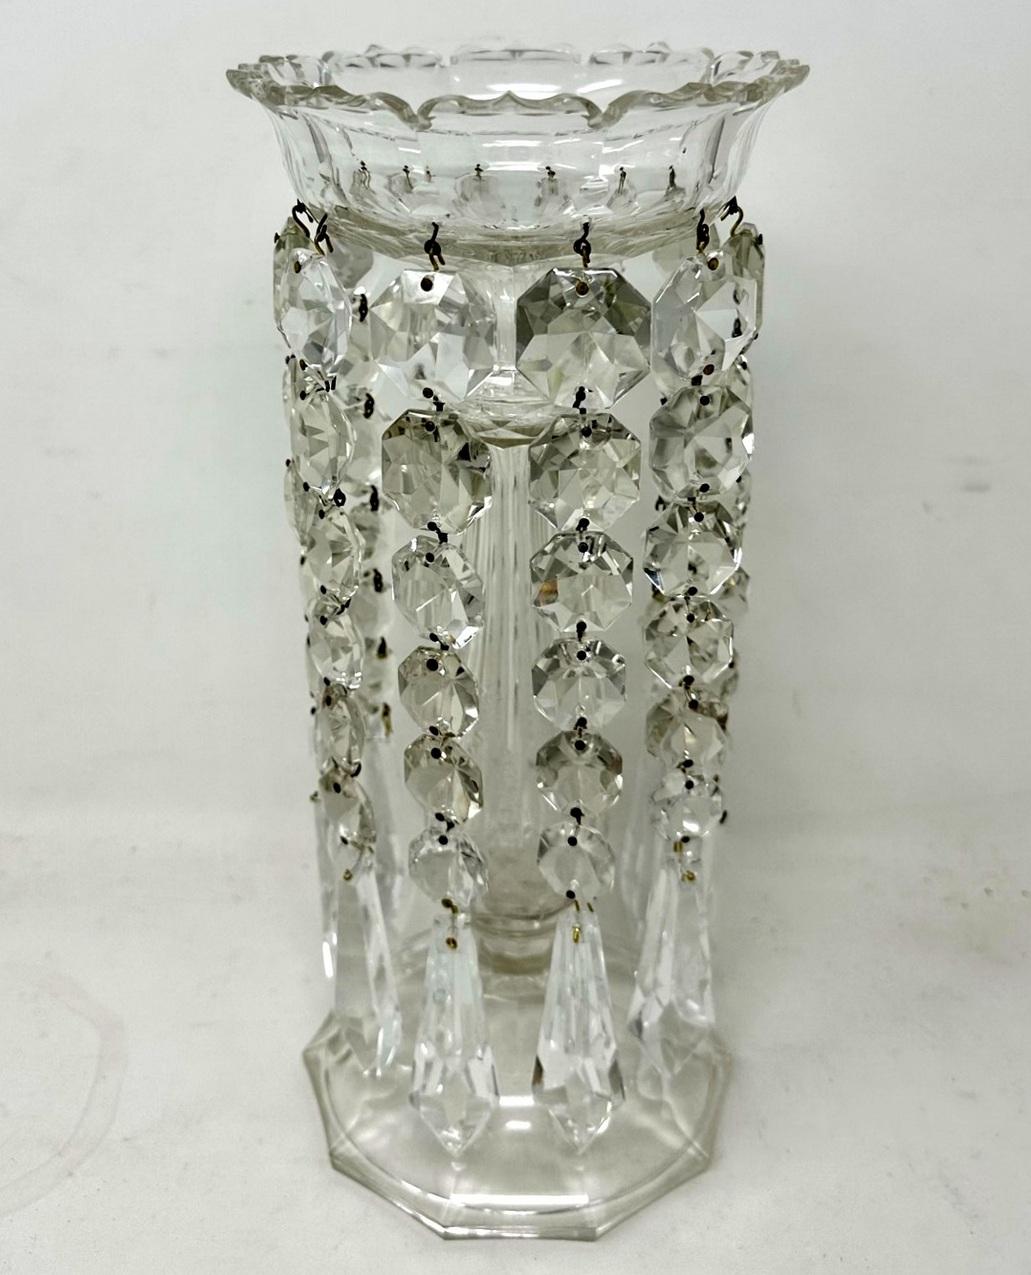 A Stylish Example of a Fine Hand Cut Full Lead Crystal Luster of outstanding heavy gauge quality and good size proportions, made in Ireland by the World-famous Irish Glass Company Waterford Crystal, Waterford, County Tipperary. Late Nineteenth,